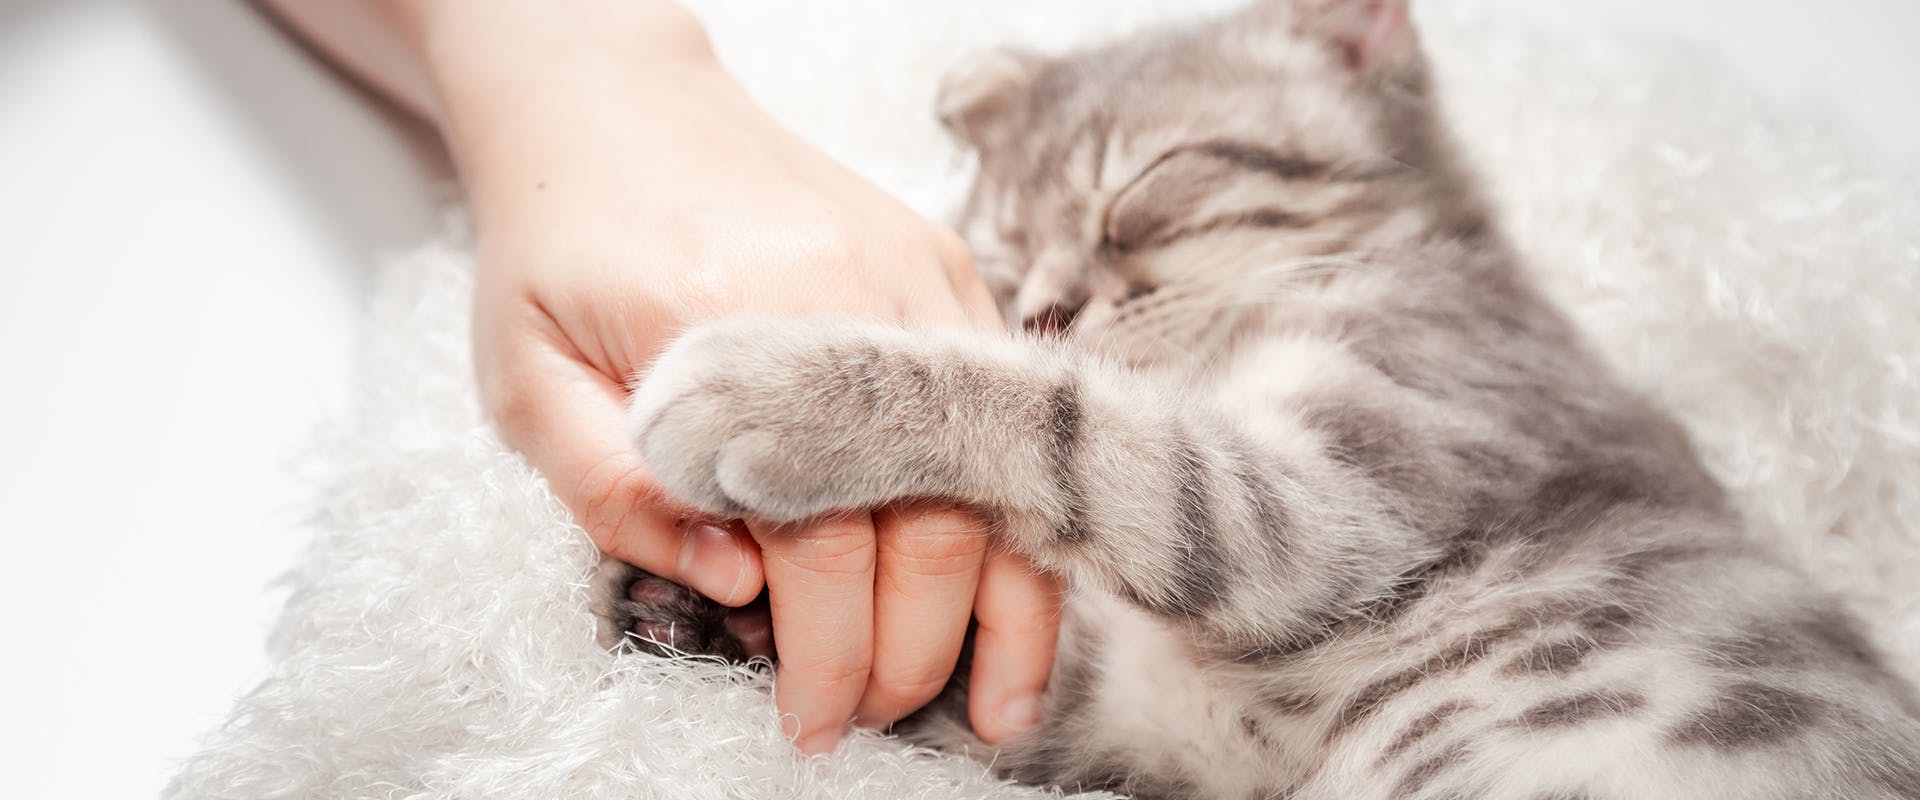 Why do cats sleep on you? A grey tabby cat sleeping, holding on to a person's hand